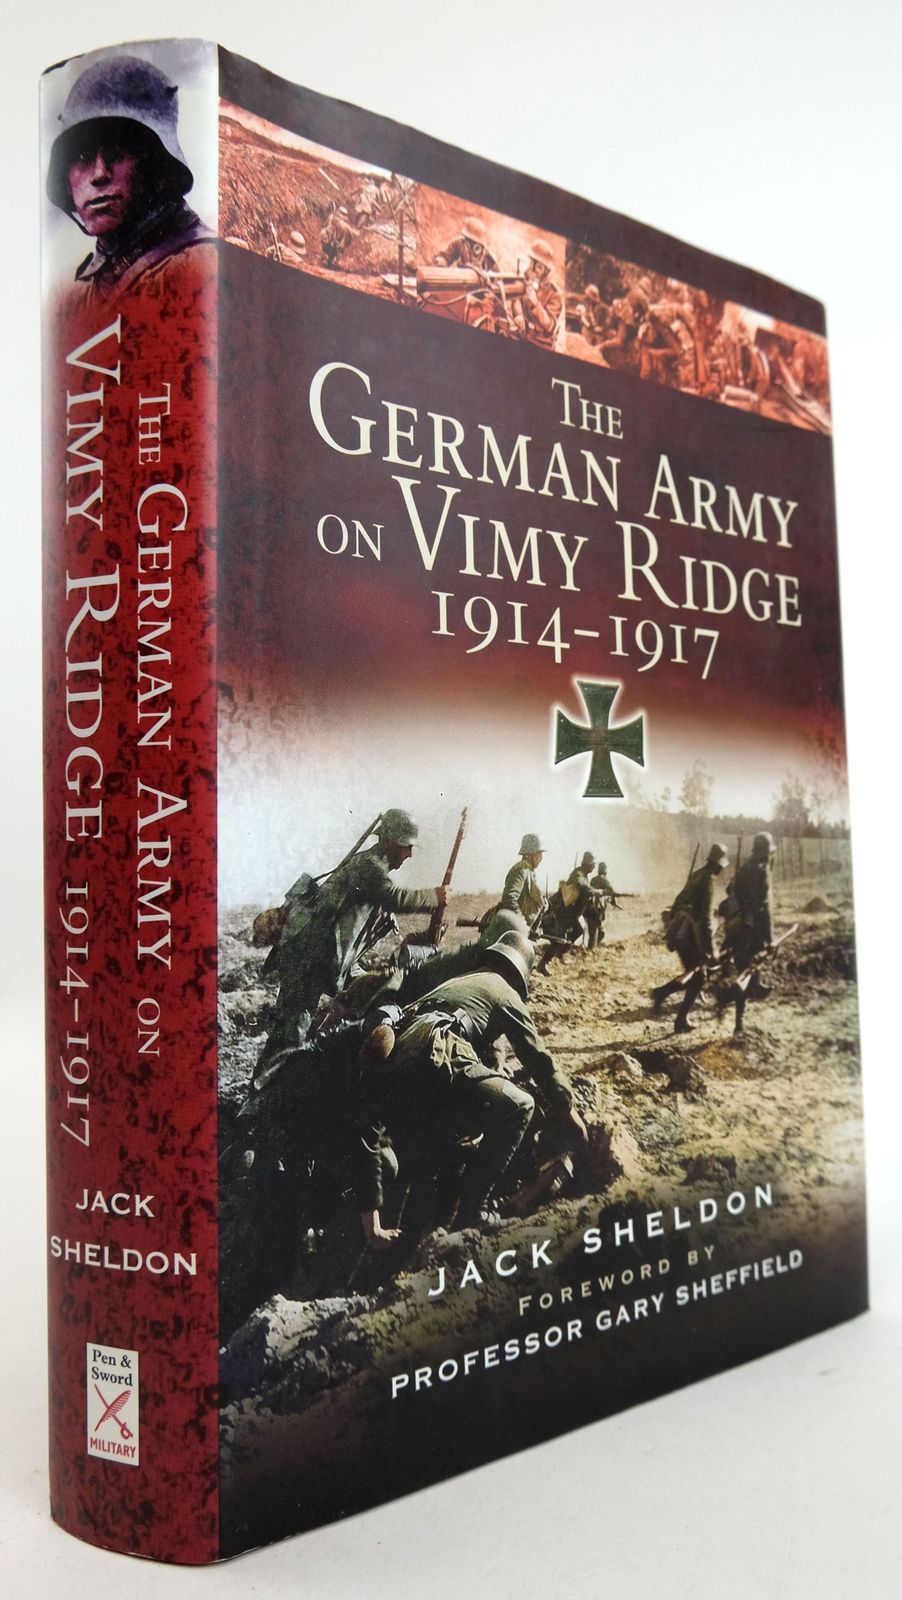 Photo of THE GERMAN ARMY ON VIMY RIDGE 1914-1917 written by Sheldon, Jack published by Pen & Sword Military (STOCK CODE: 1819532)  for sale by Stella & Rose's Books